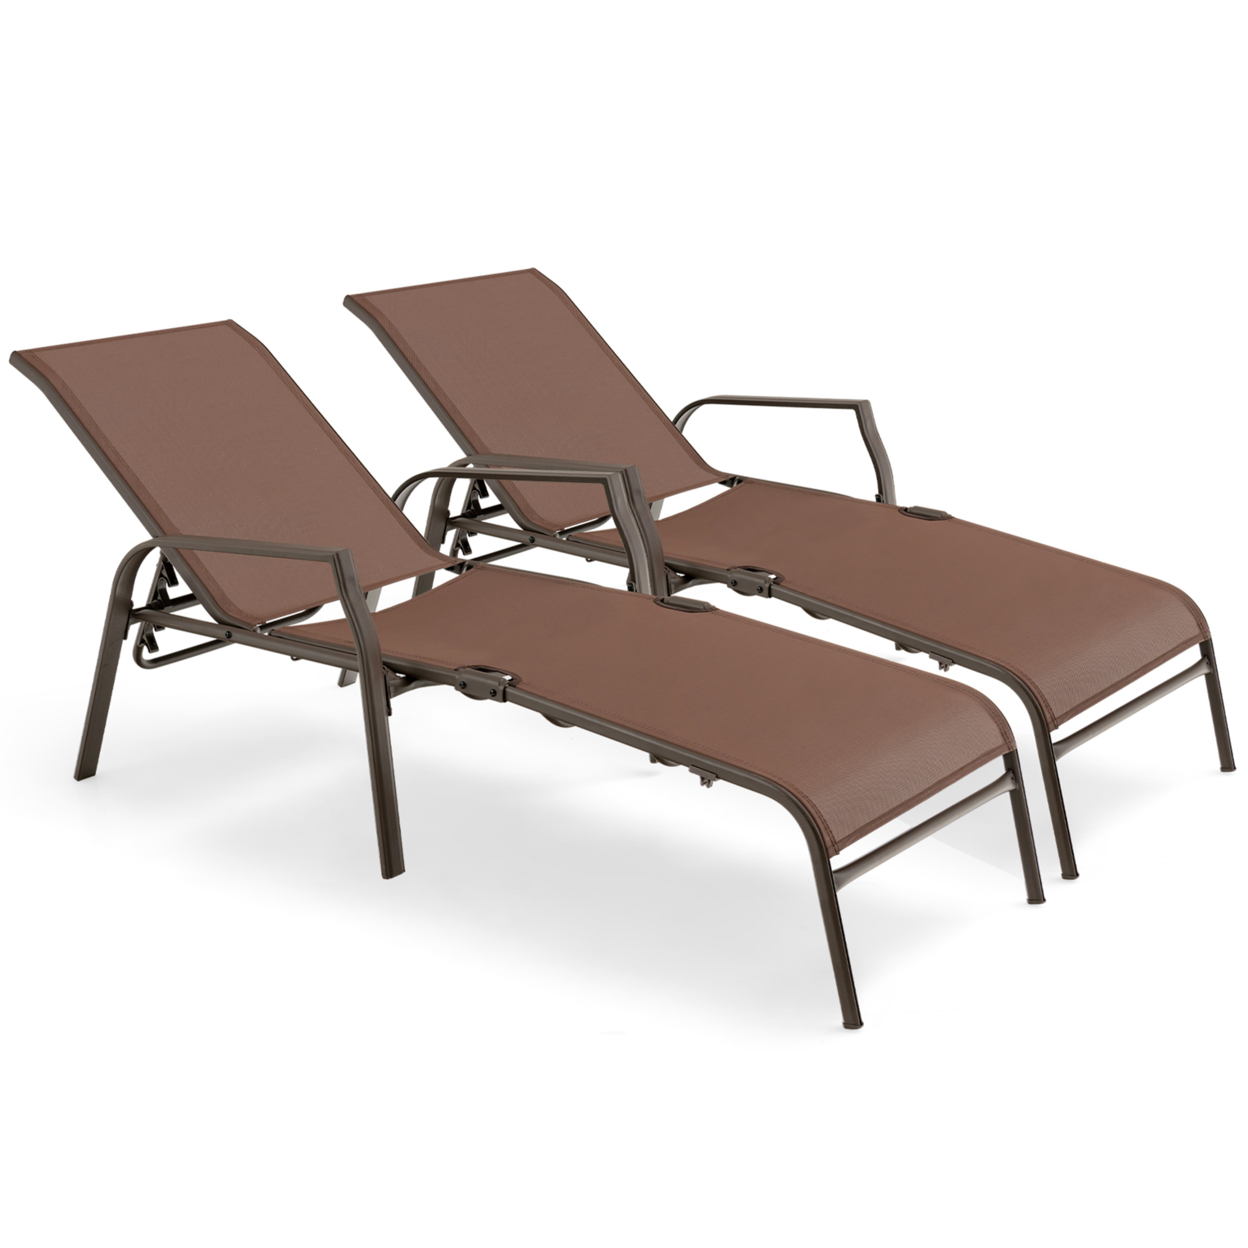 Set Of 2 Patio Chaise Lounge Stackable Folding Lounge Chair W/ Adjustable Back